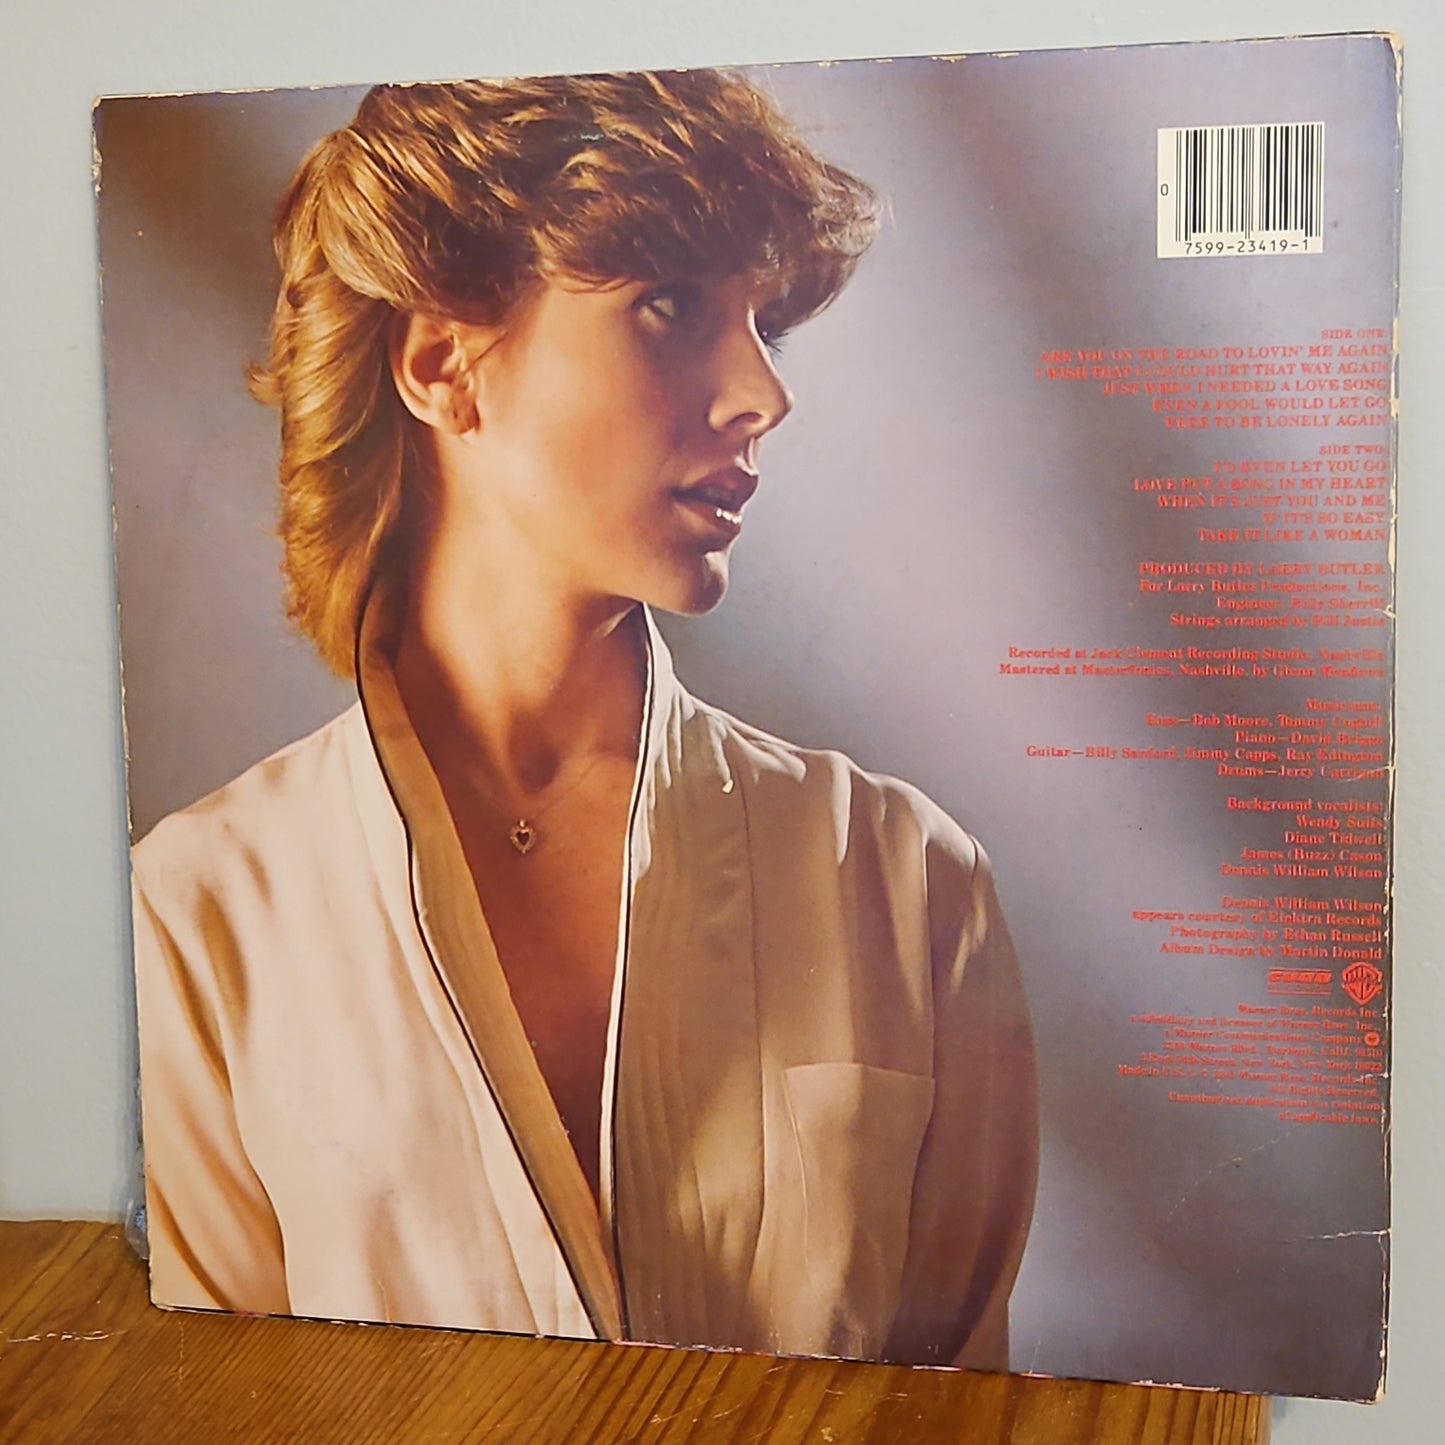 Debby Boone Love Has No Reason By Warner Brothers Records 1980